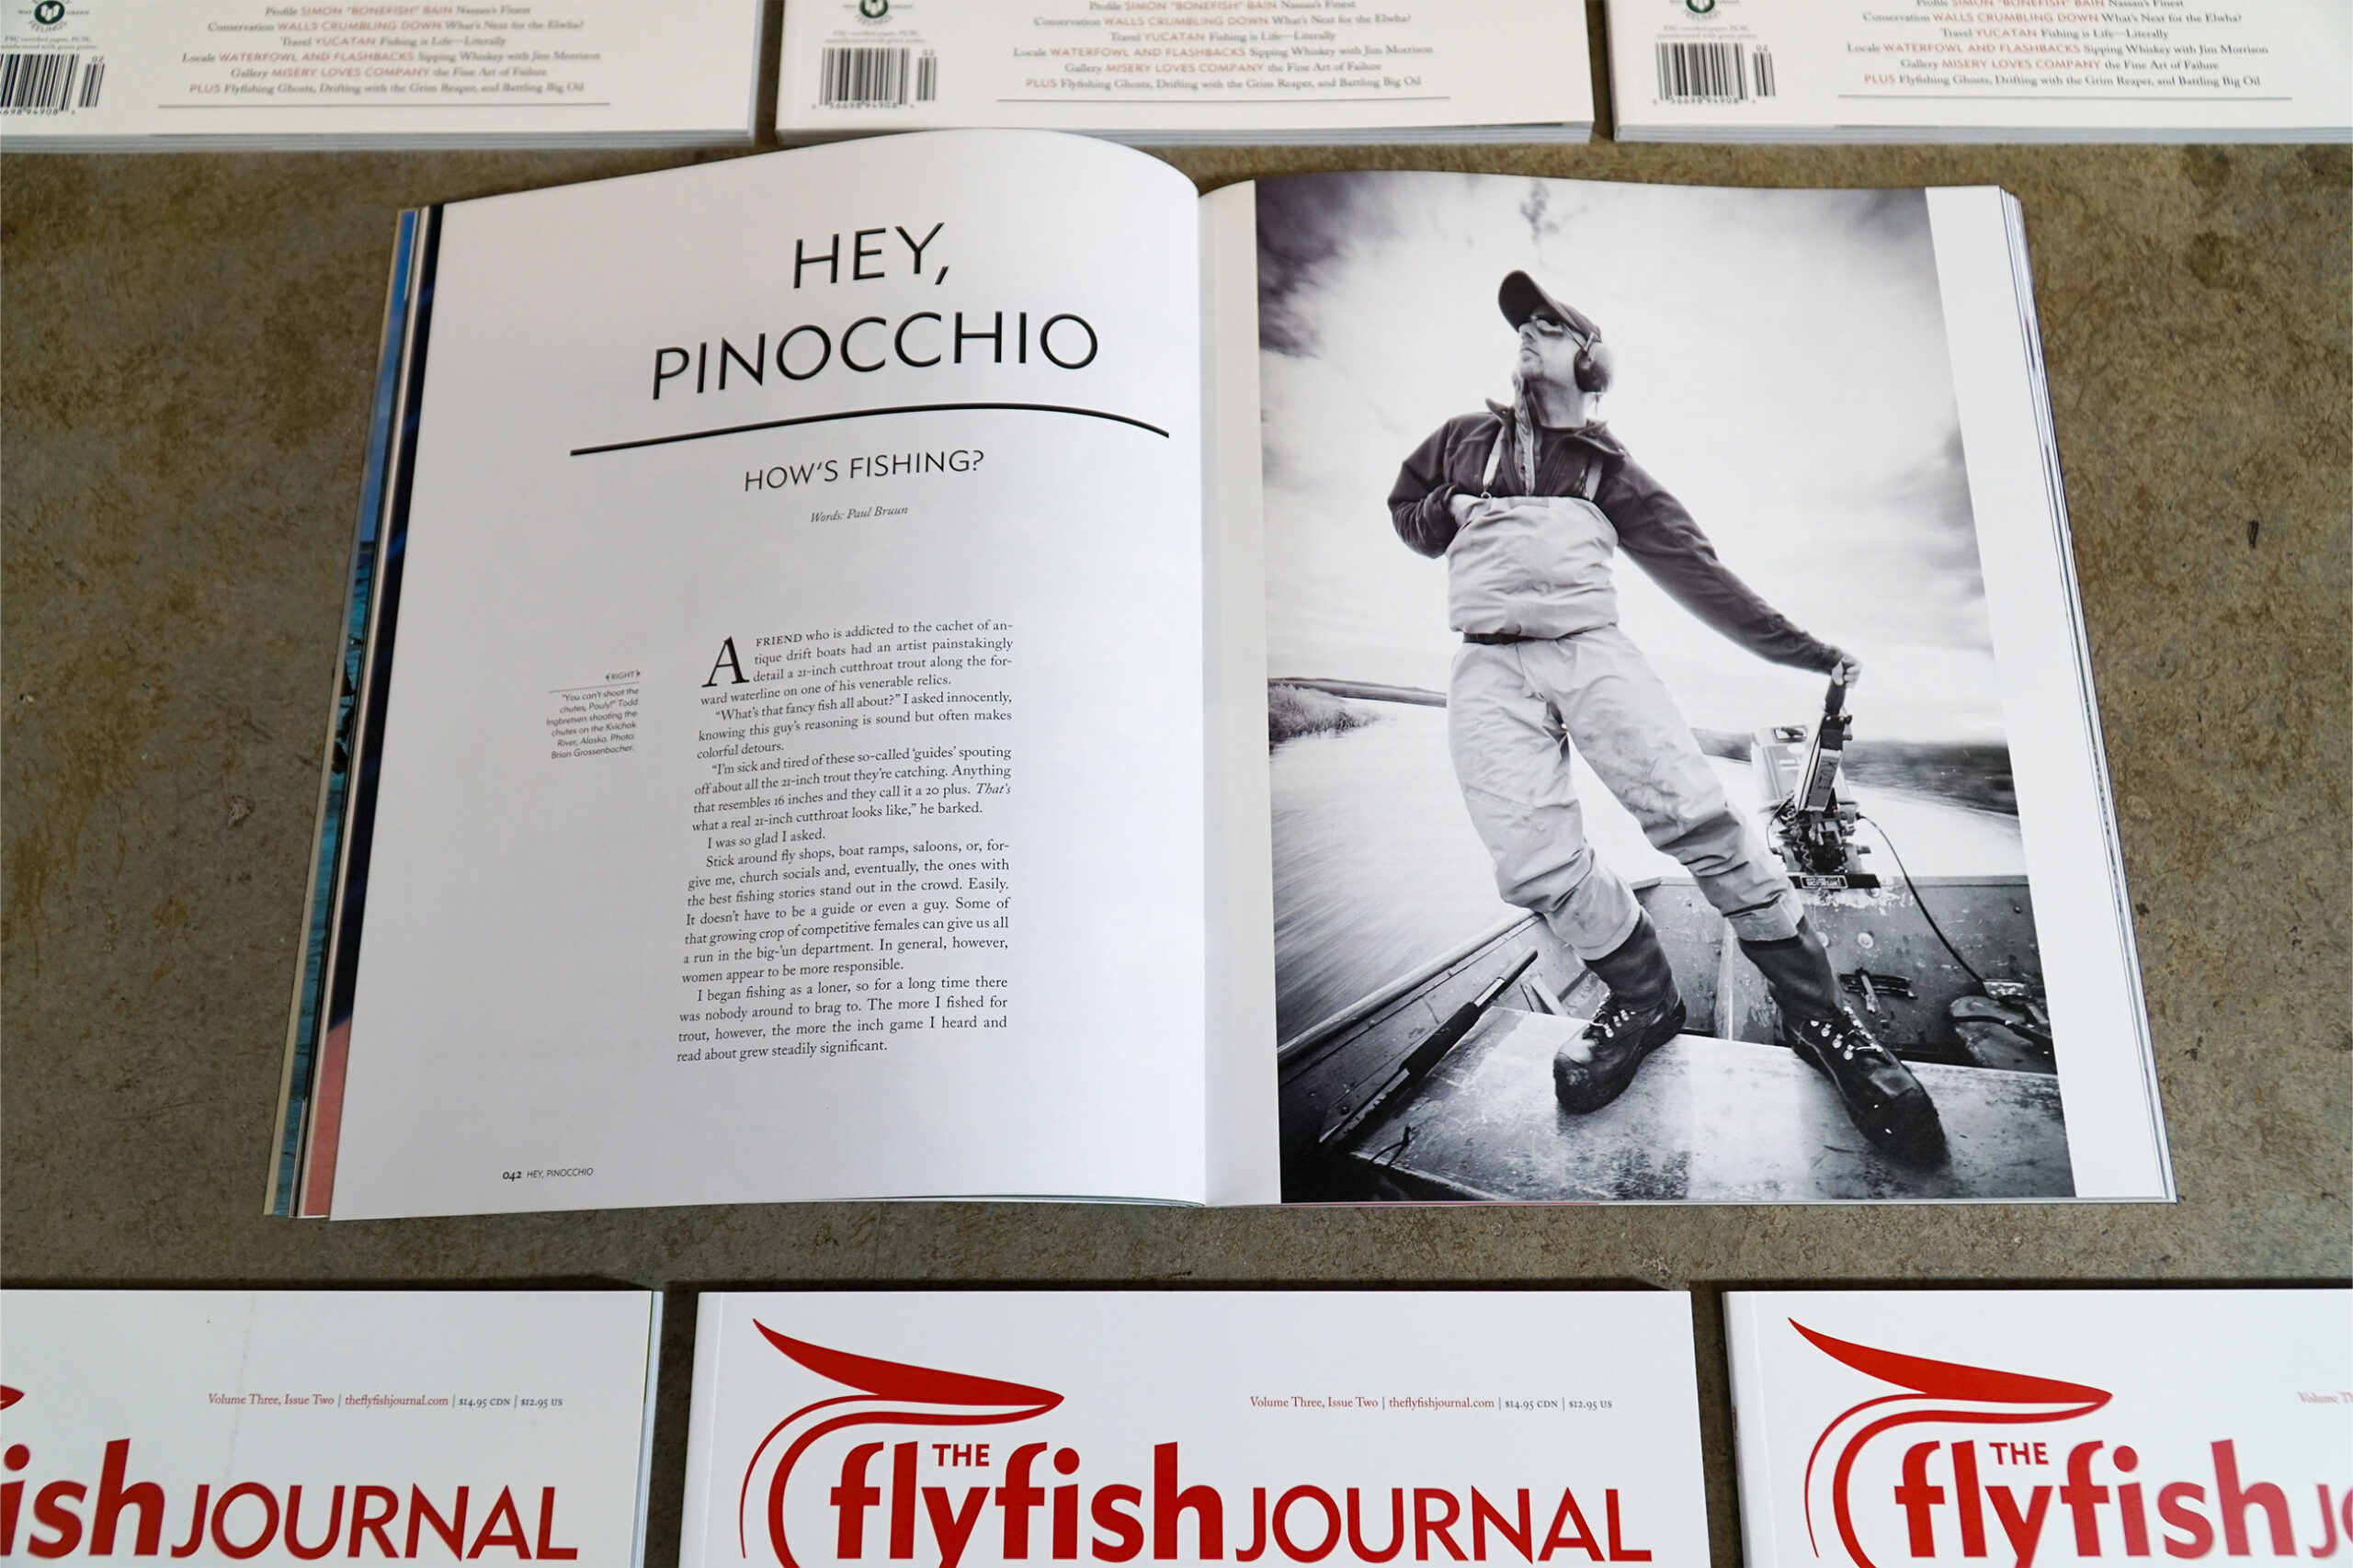 The Flyfish Journal Volume 3 Issue 2 Feature Hey, Pinocchio